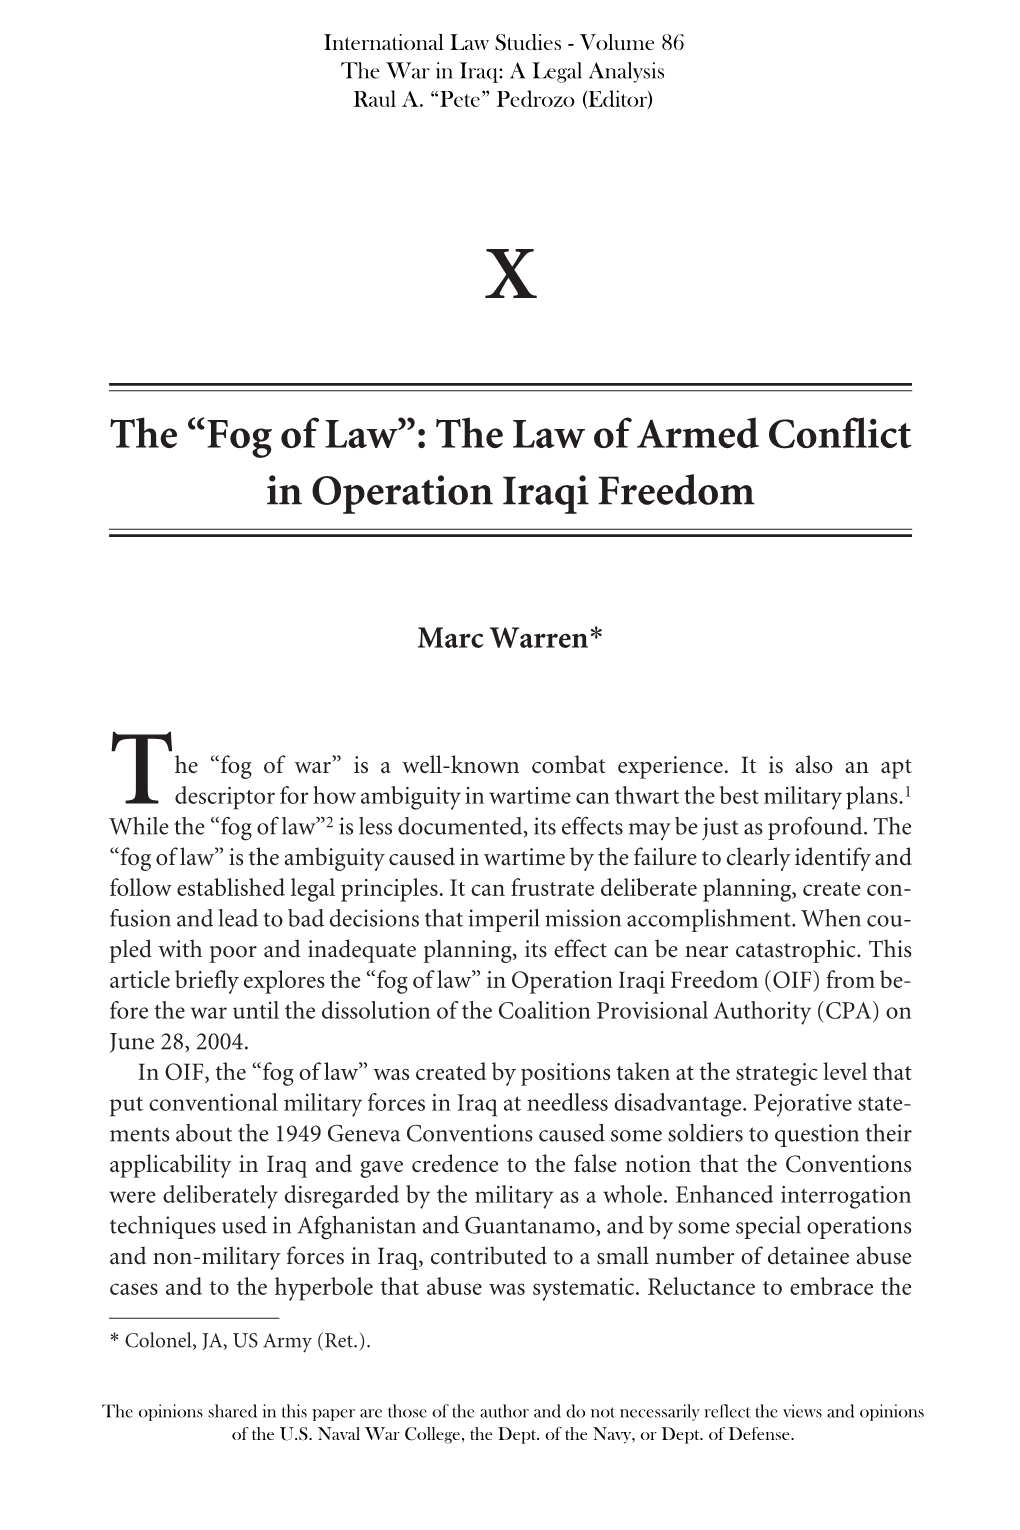 The Law of Armed Conflict in Operation Iraqi Freedom